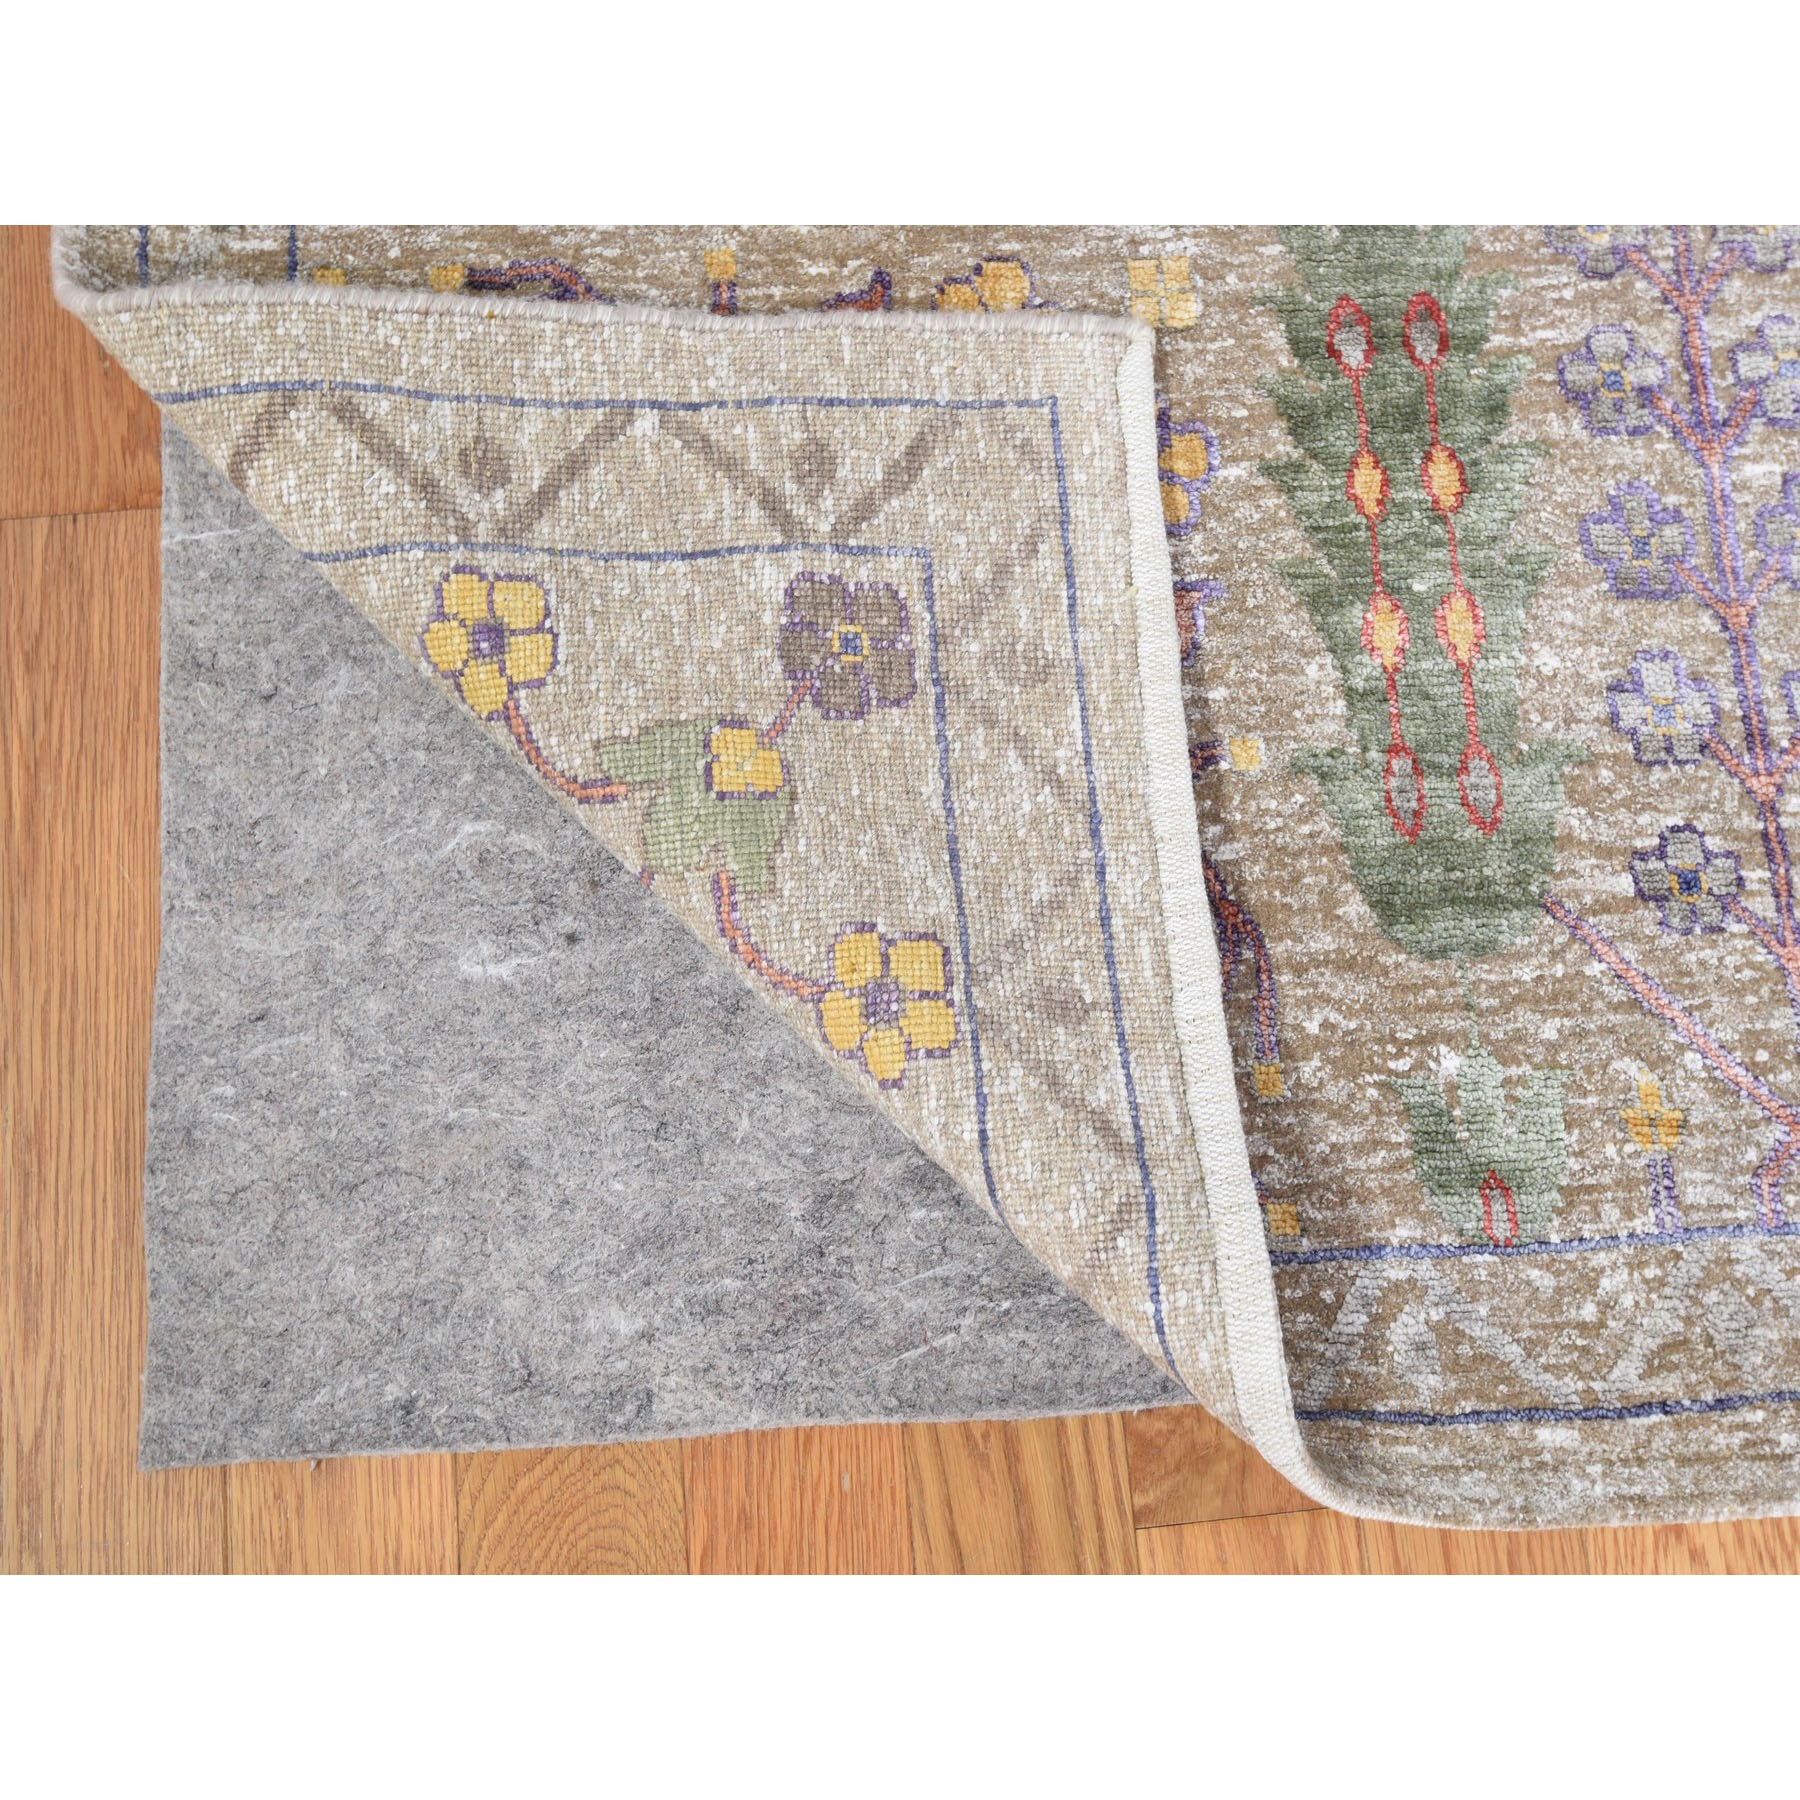 12-x14-10  Oversized Honey Brown Silk With Textured wool vaze Design Hand Knotted Oriental Rug 